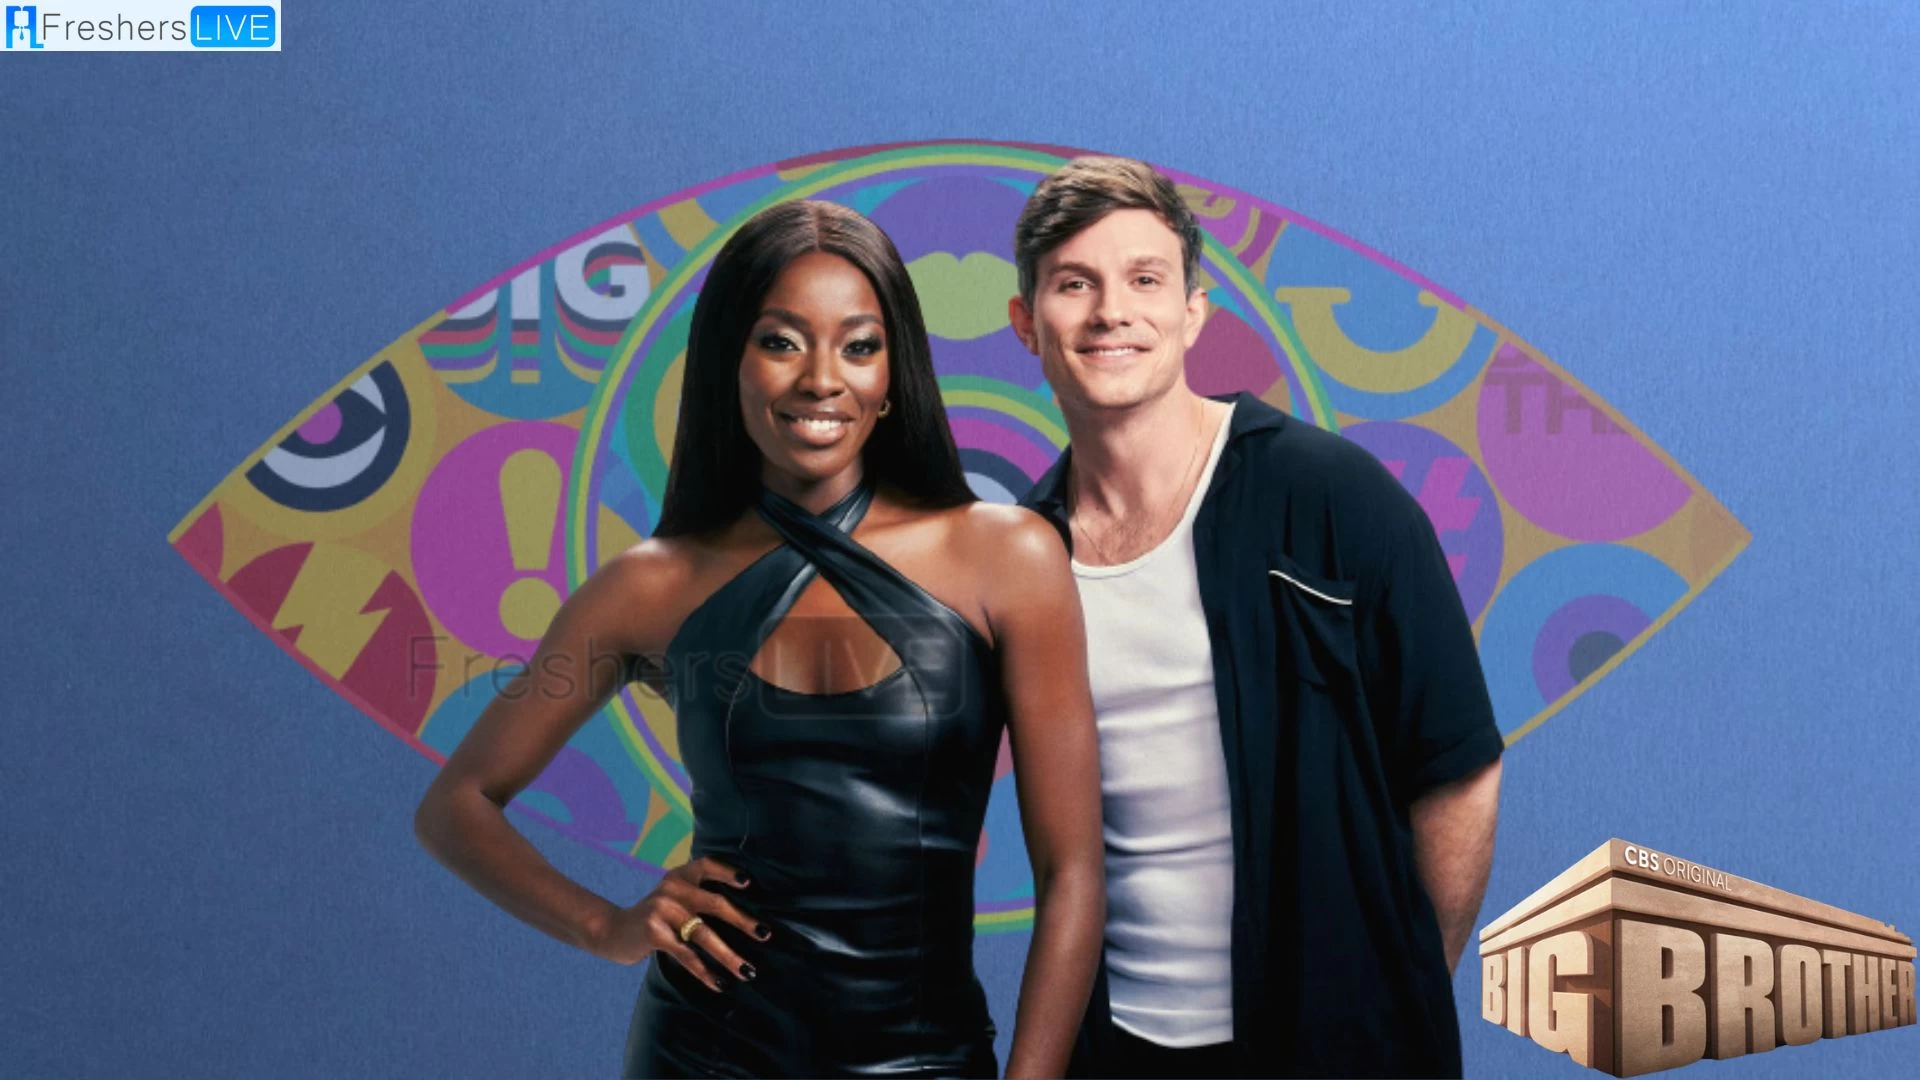 Big Brother Presenters 2023, Who is Presenting Big Brother 2023? When Does Big Brother Start 2023 UK? What Channel is Big Brother on 2023?